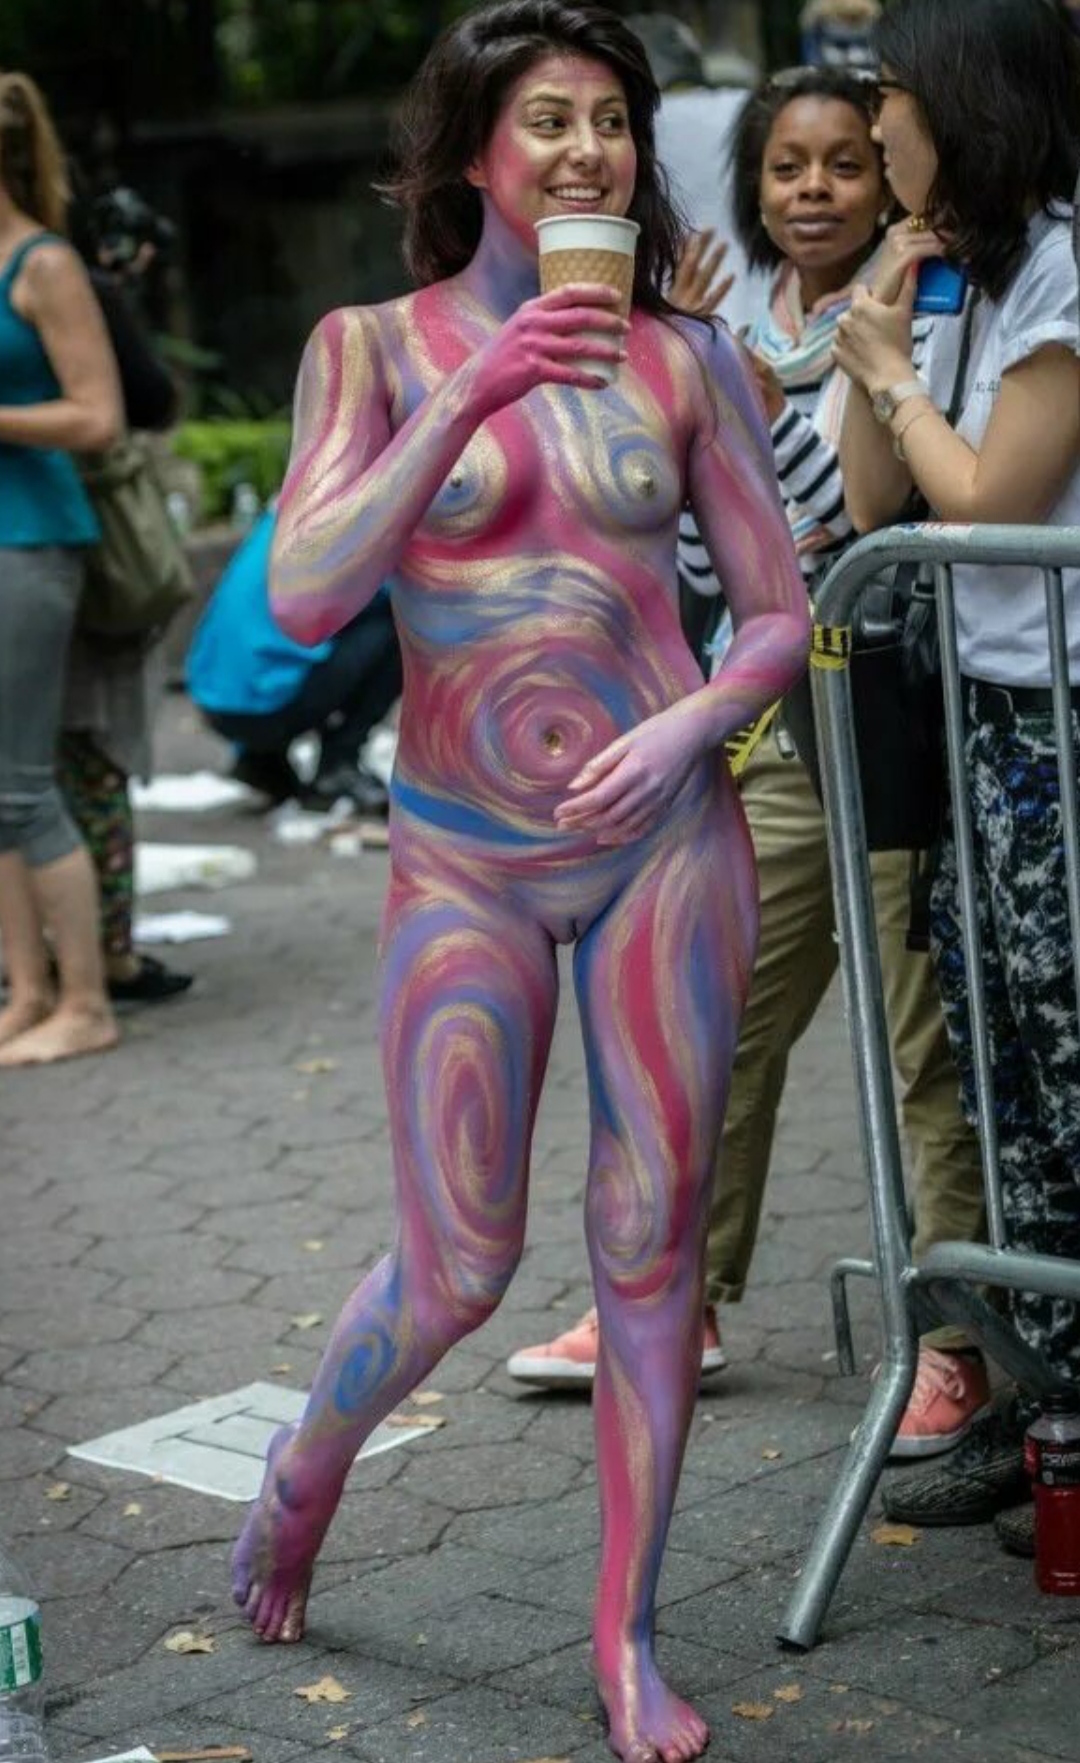 Body Painting Public Pictures Search (48 Galleries)